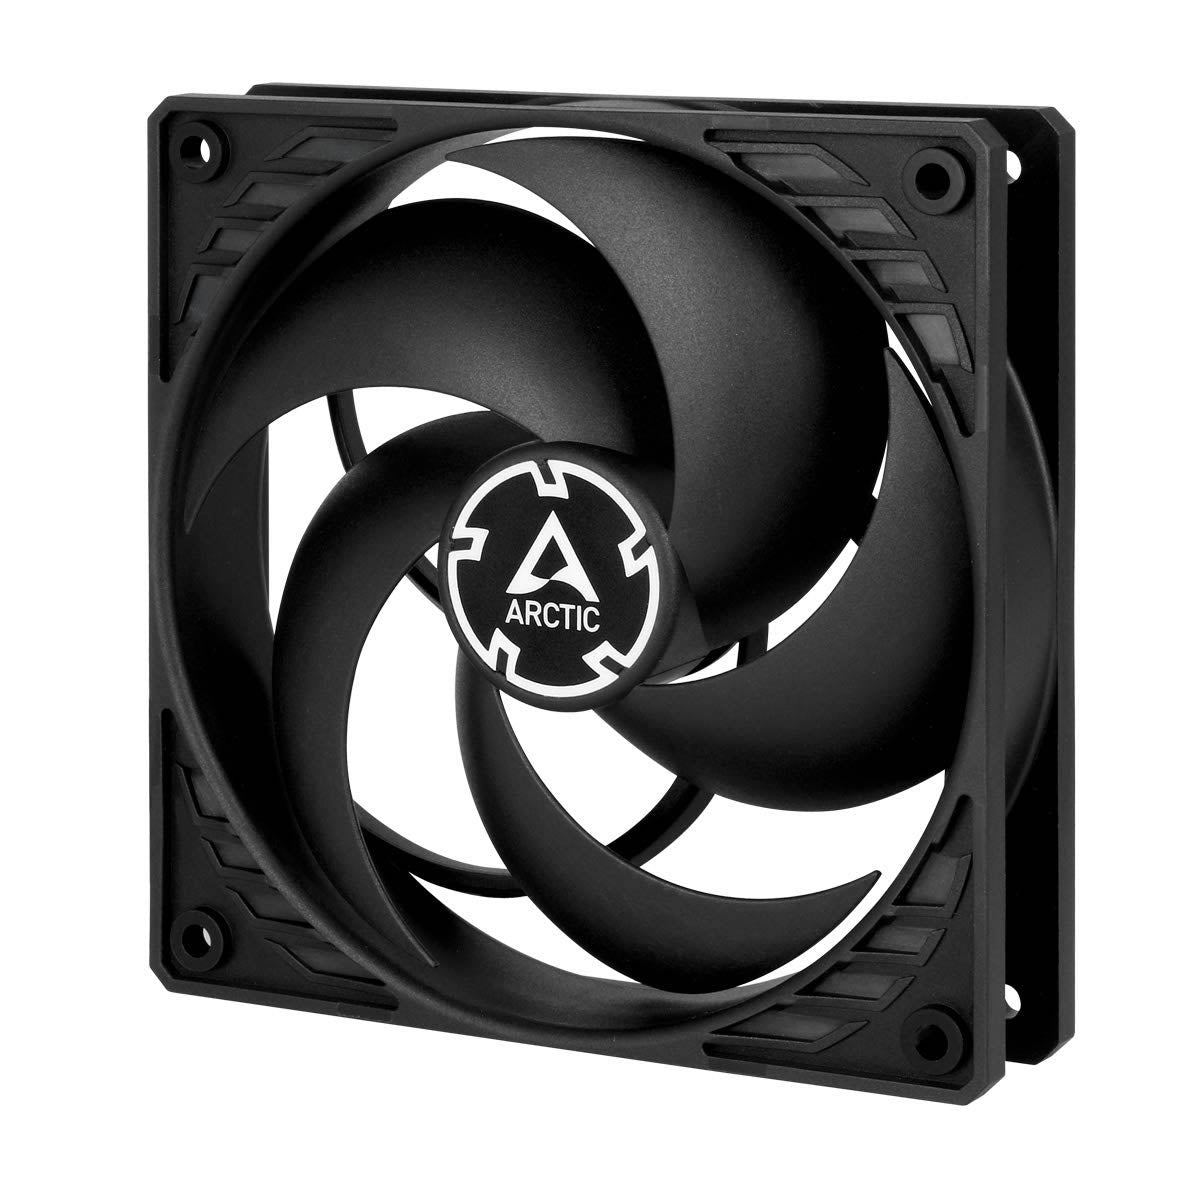 [Repacked]ARCTIC P12 PWM 120mm CPU Case Cooling Fan - Black